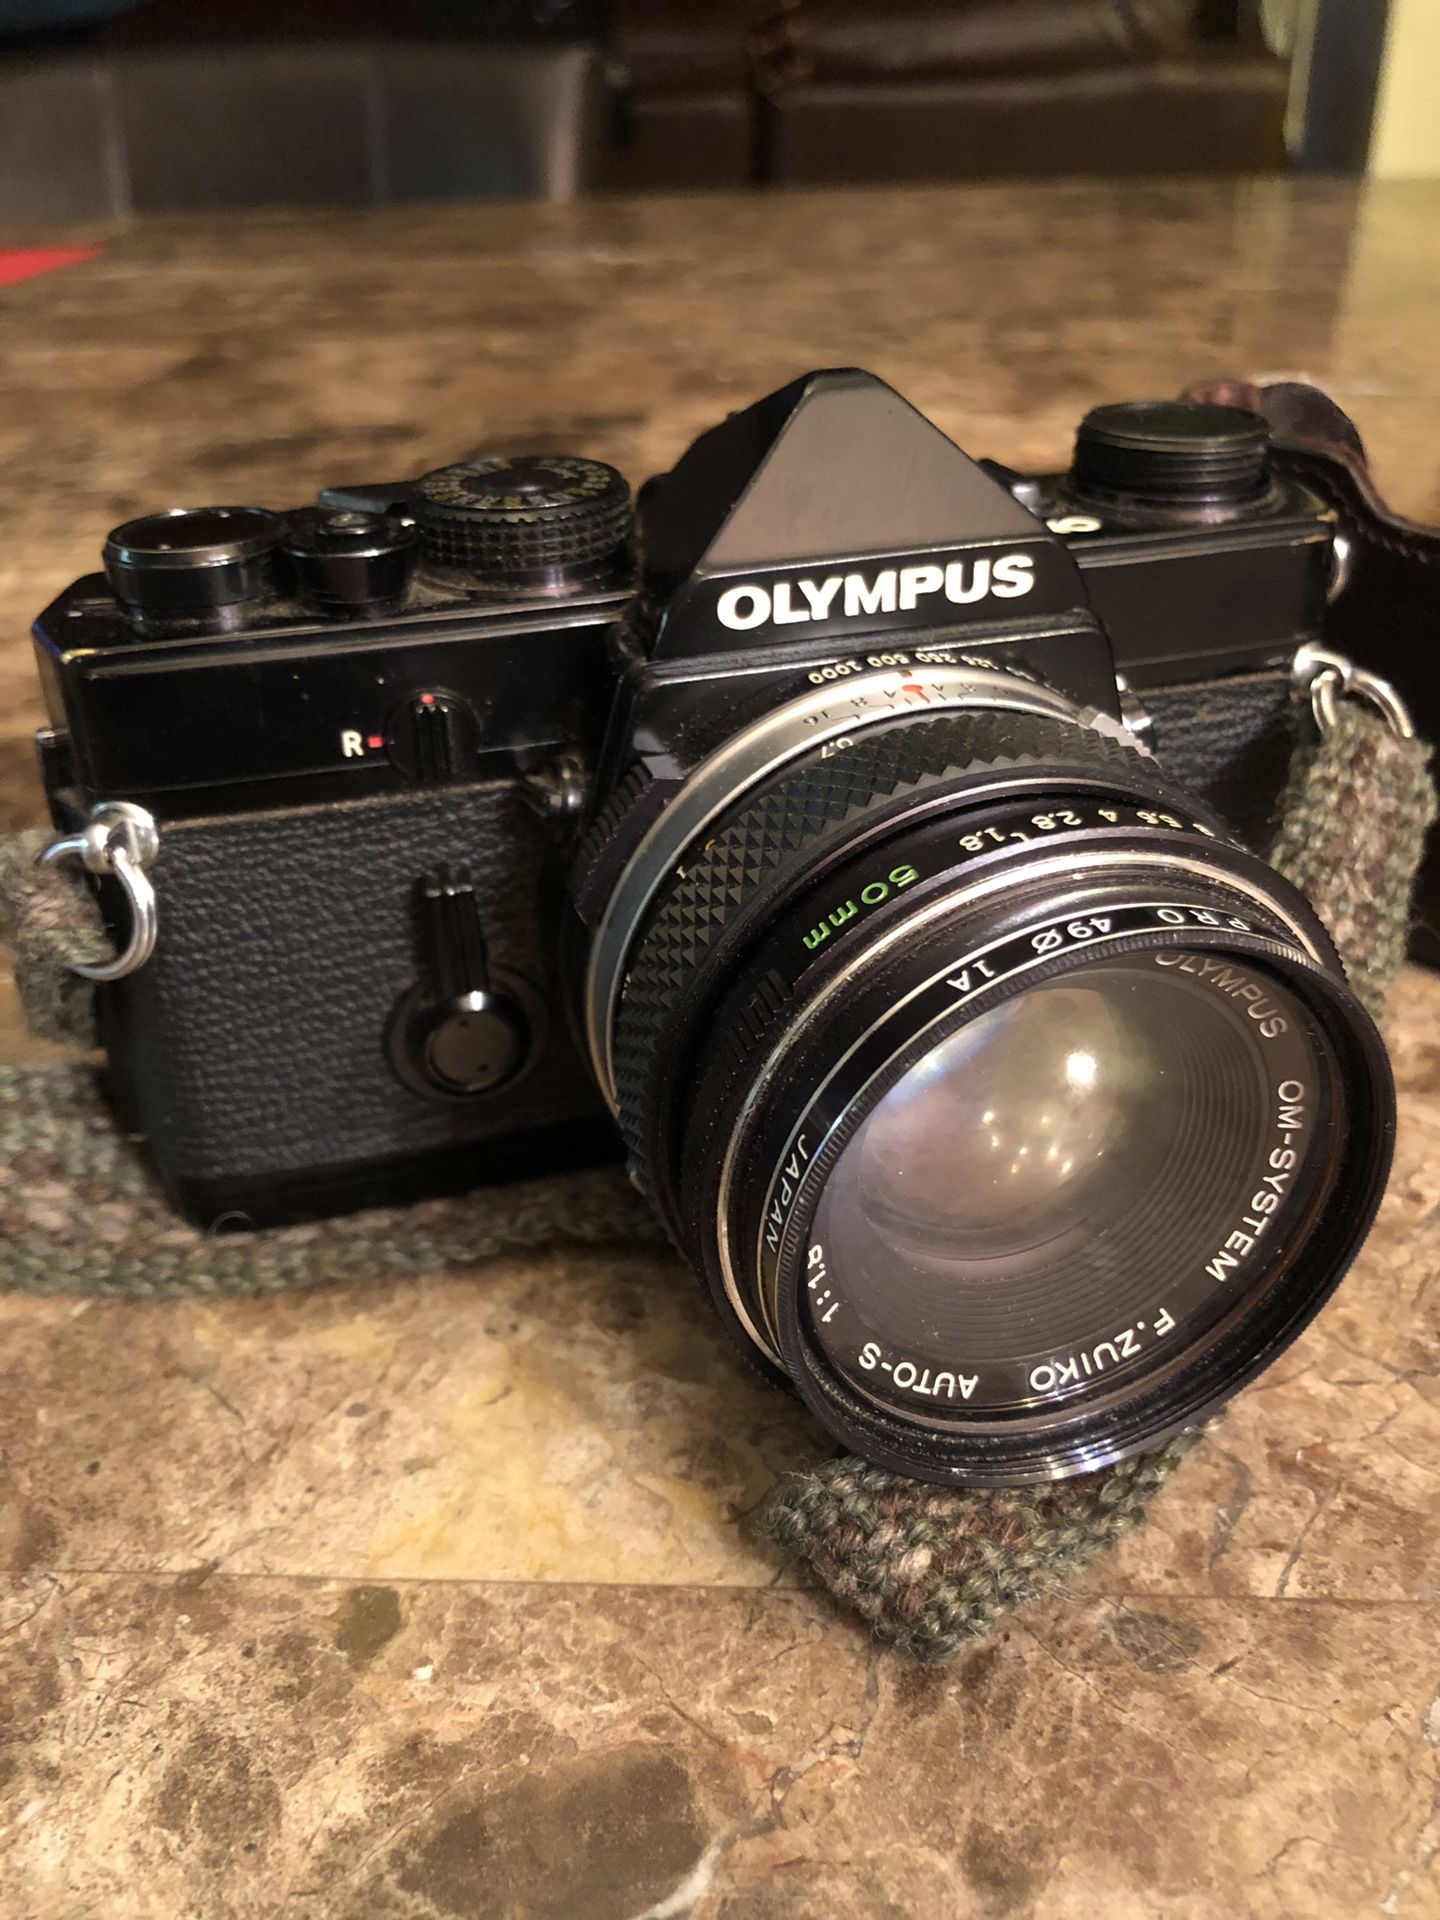 Olympus OM-1 35mm SLR Film Camera, Perfect for student photography class